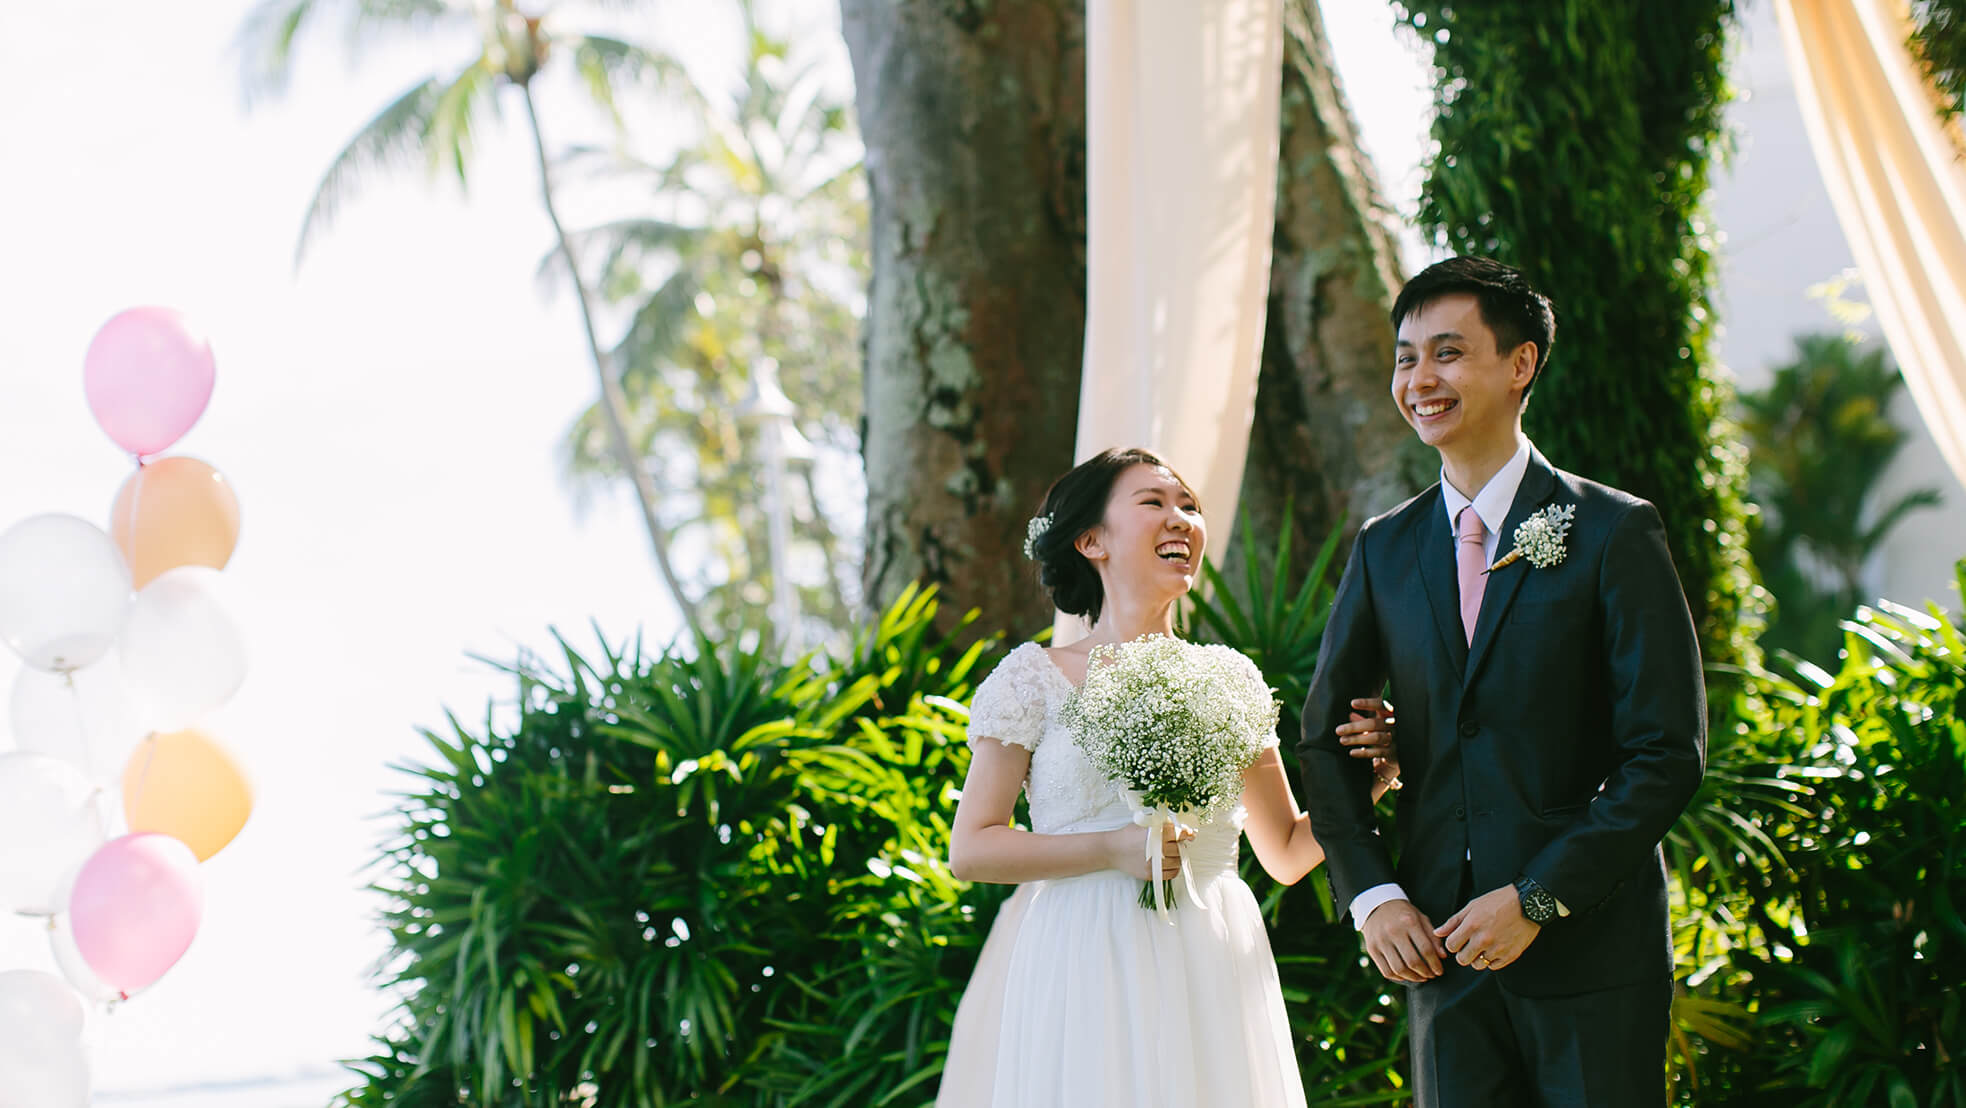 Sugar & Spice Events - Just married couple at the E&O Hotel Penang